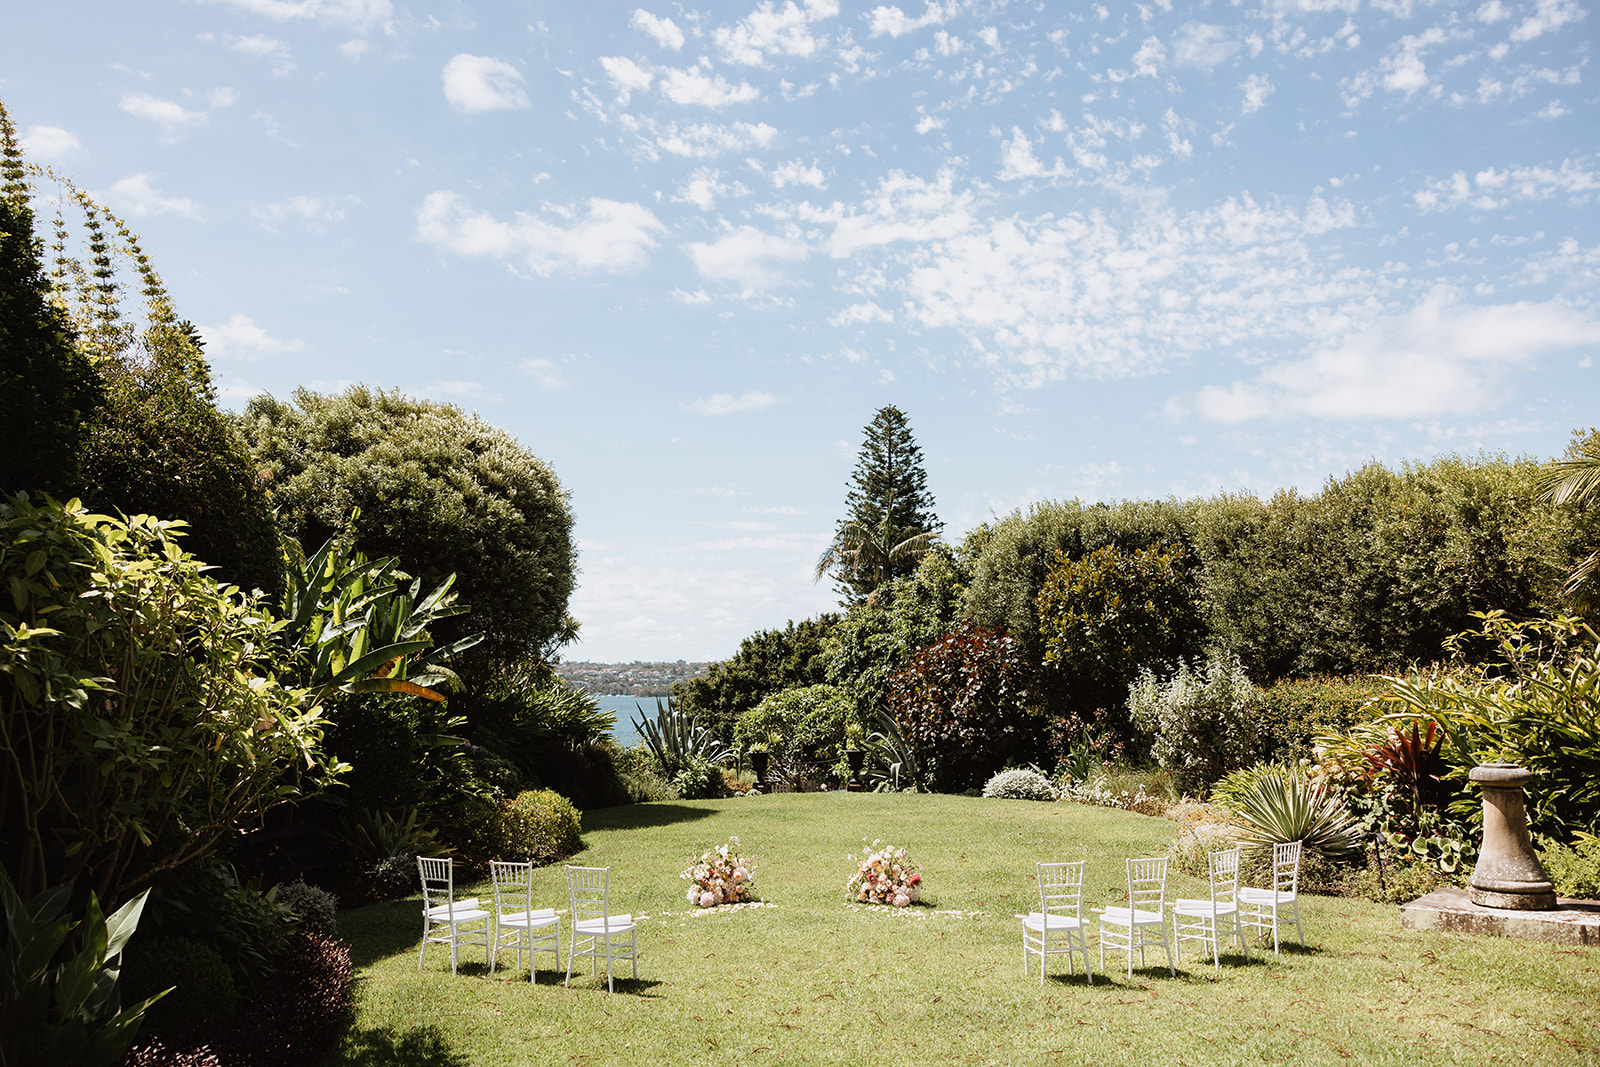 Wedding venue at Lindesay House, Darling Point New South Wales